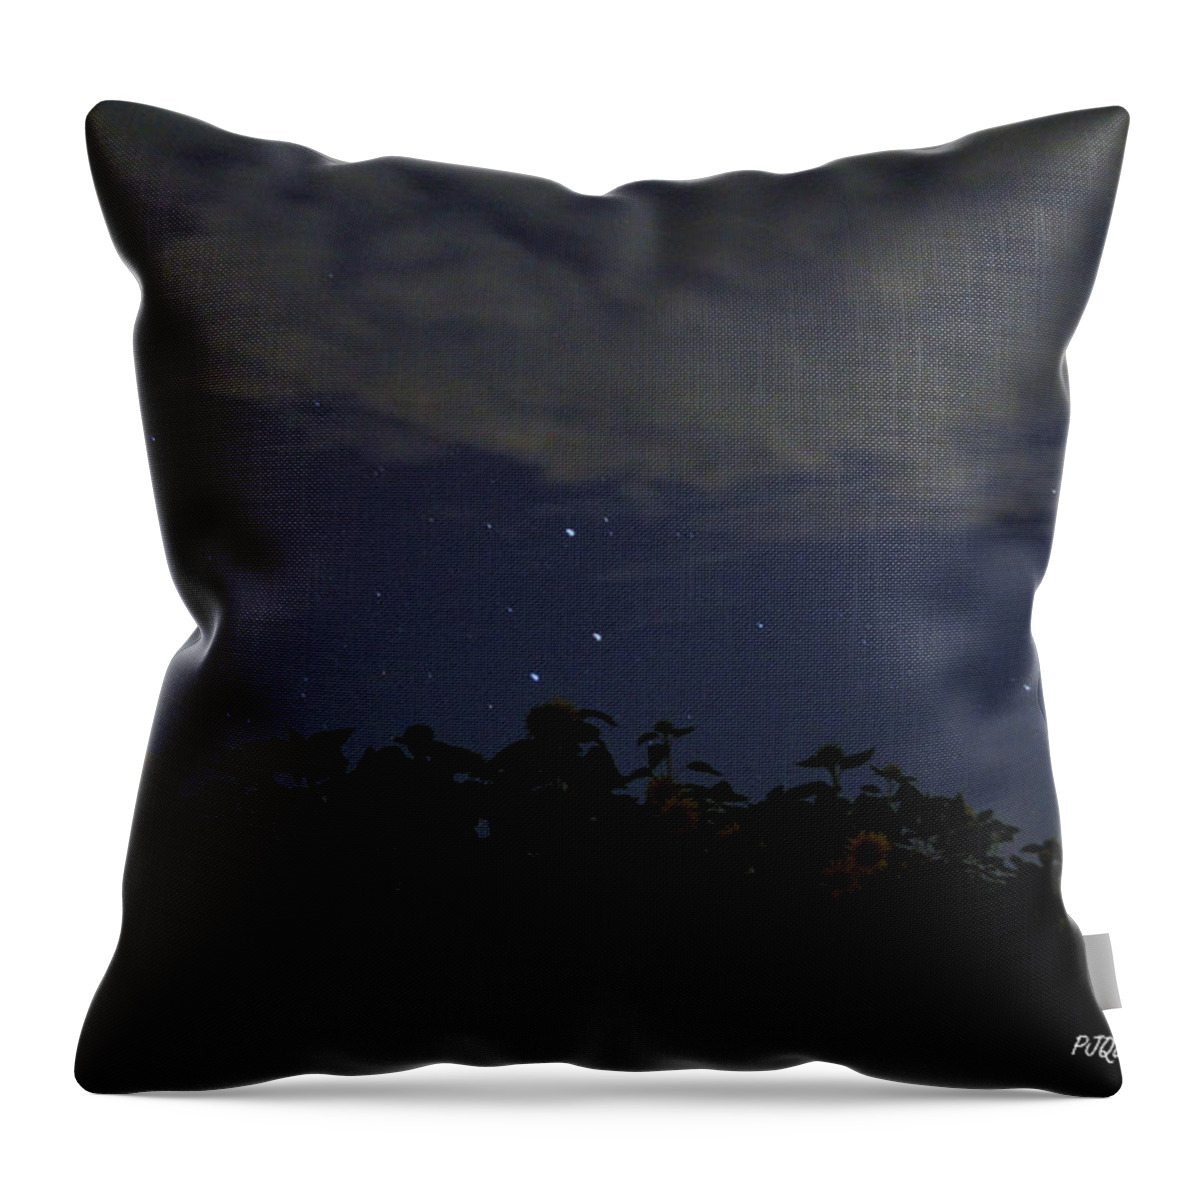  Throw Pillow featuring the photograph Trifecta at Crescent Farm by PJQandFriends Photography